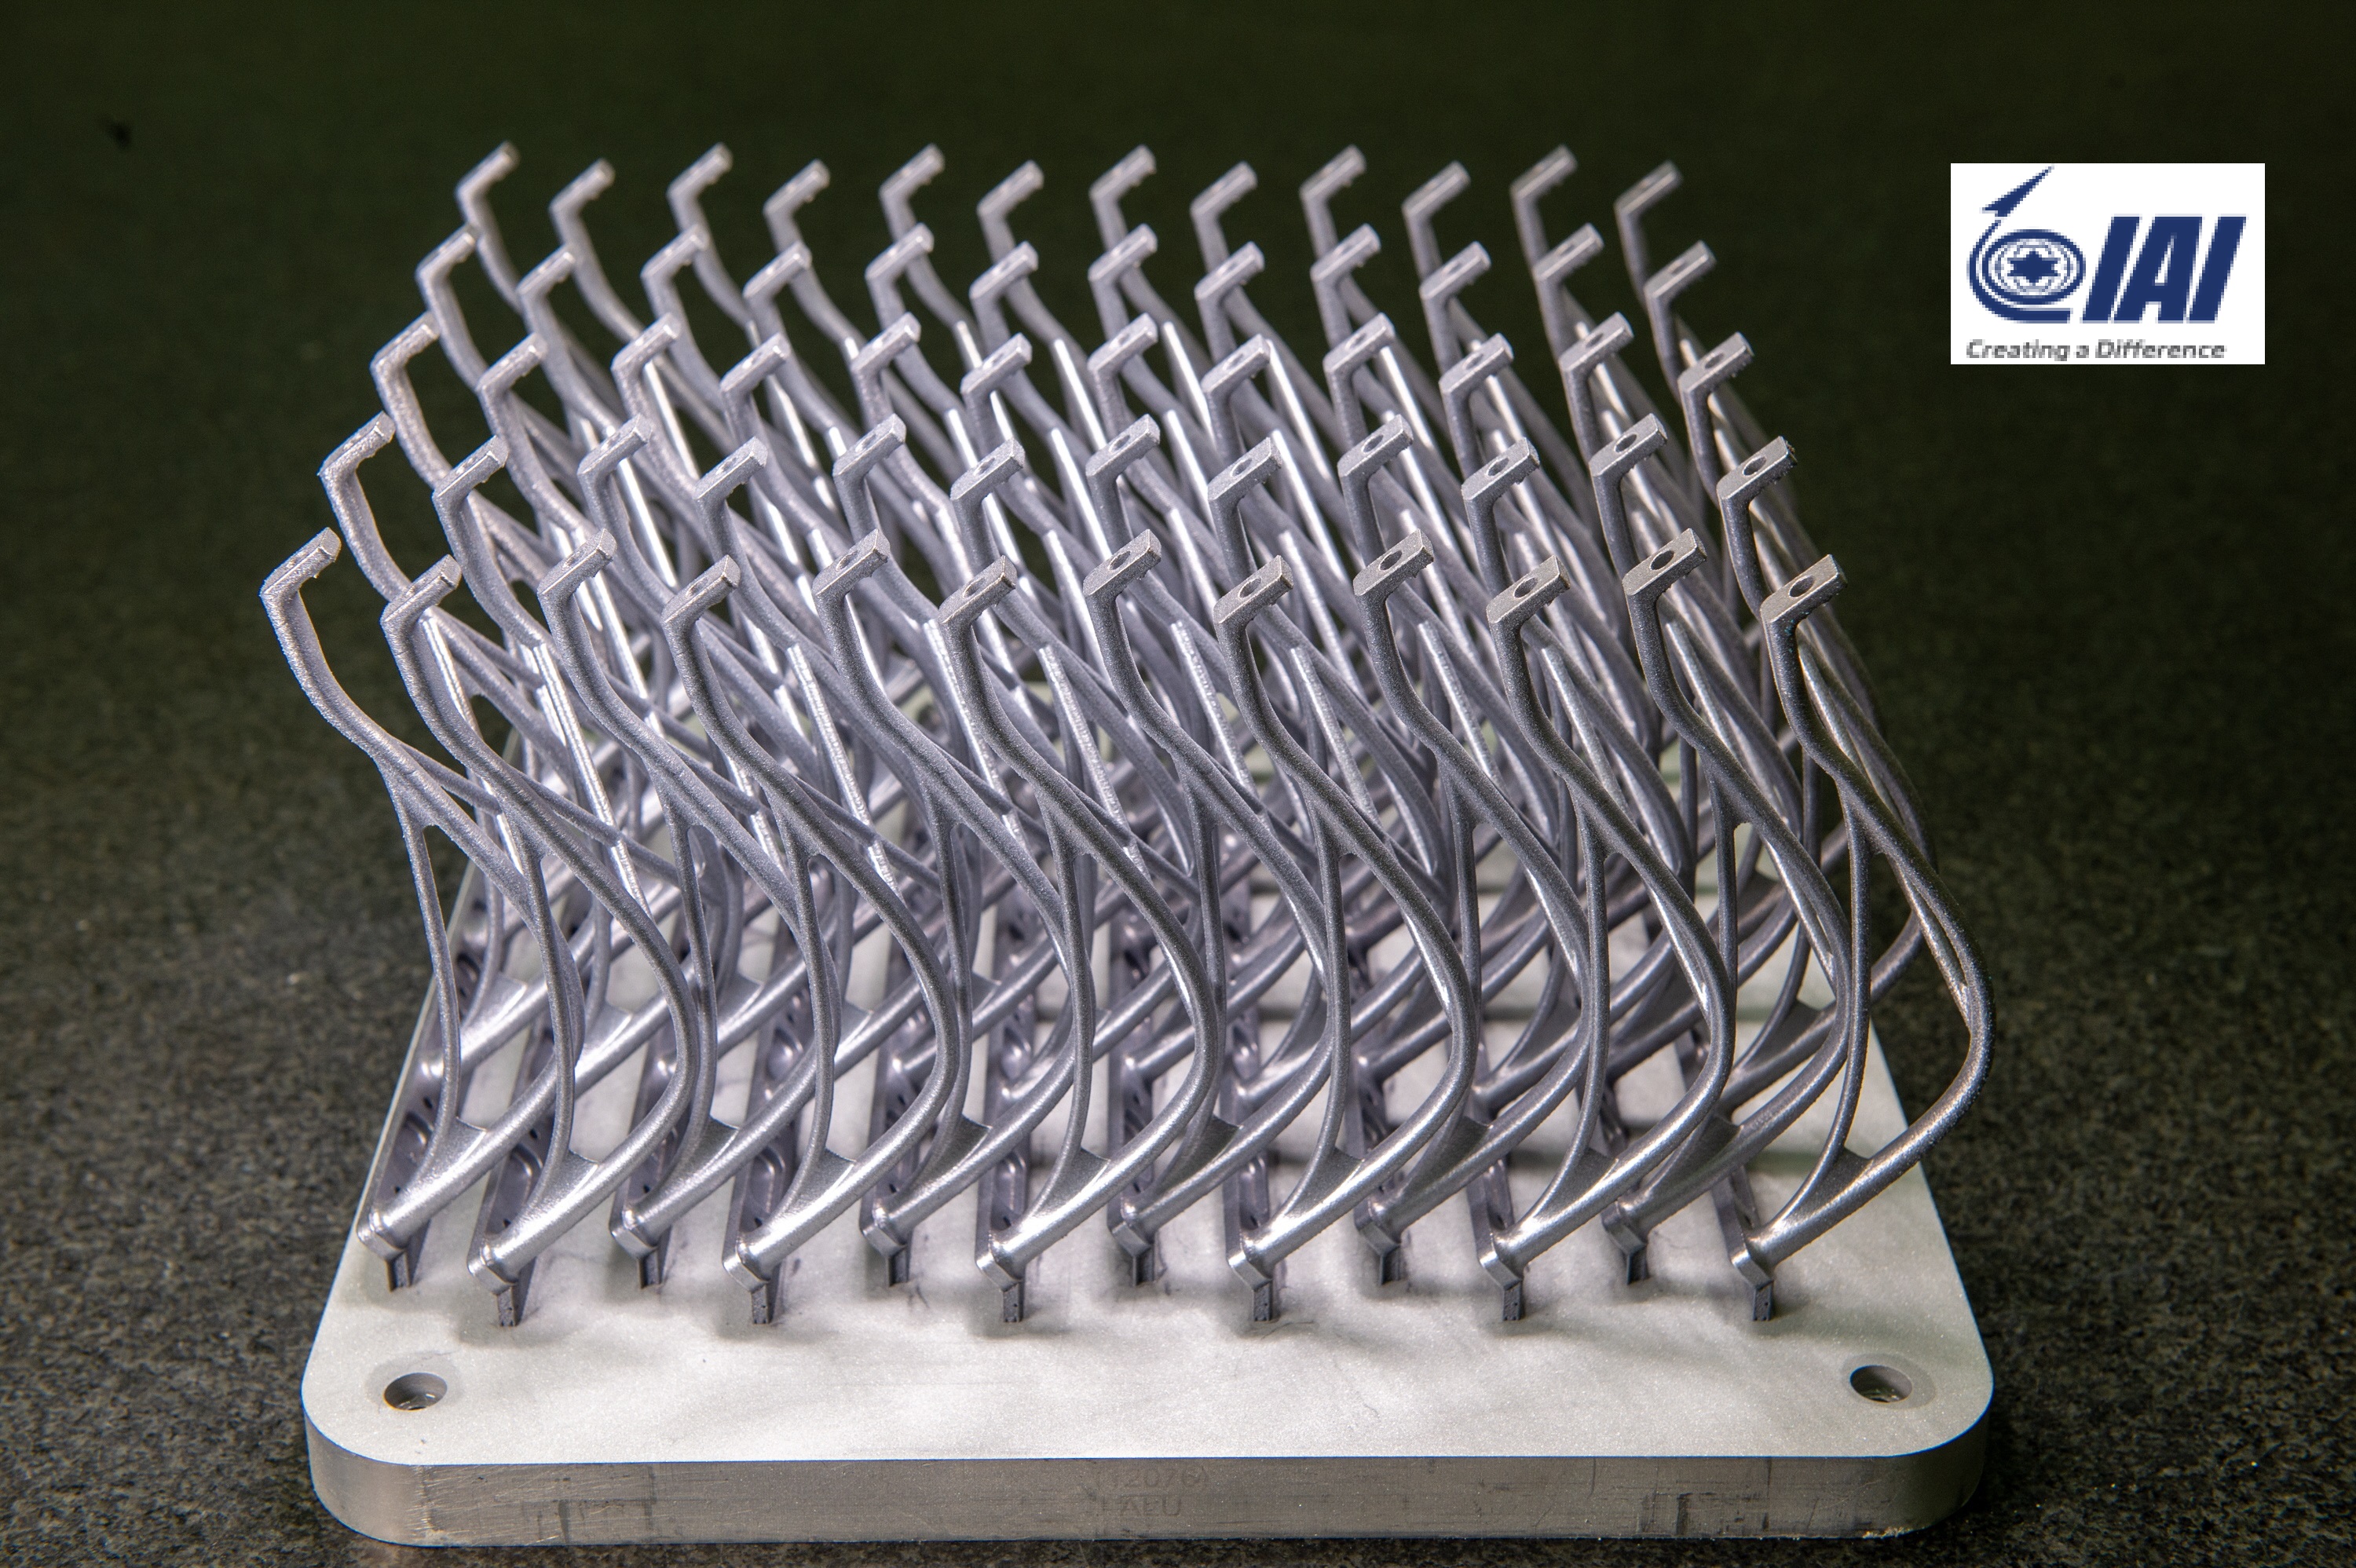 Design for Additive Manufacturing with Topology Optimization